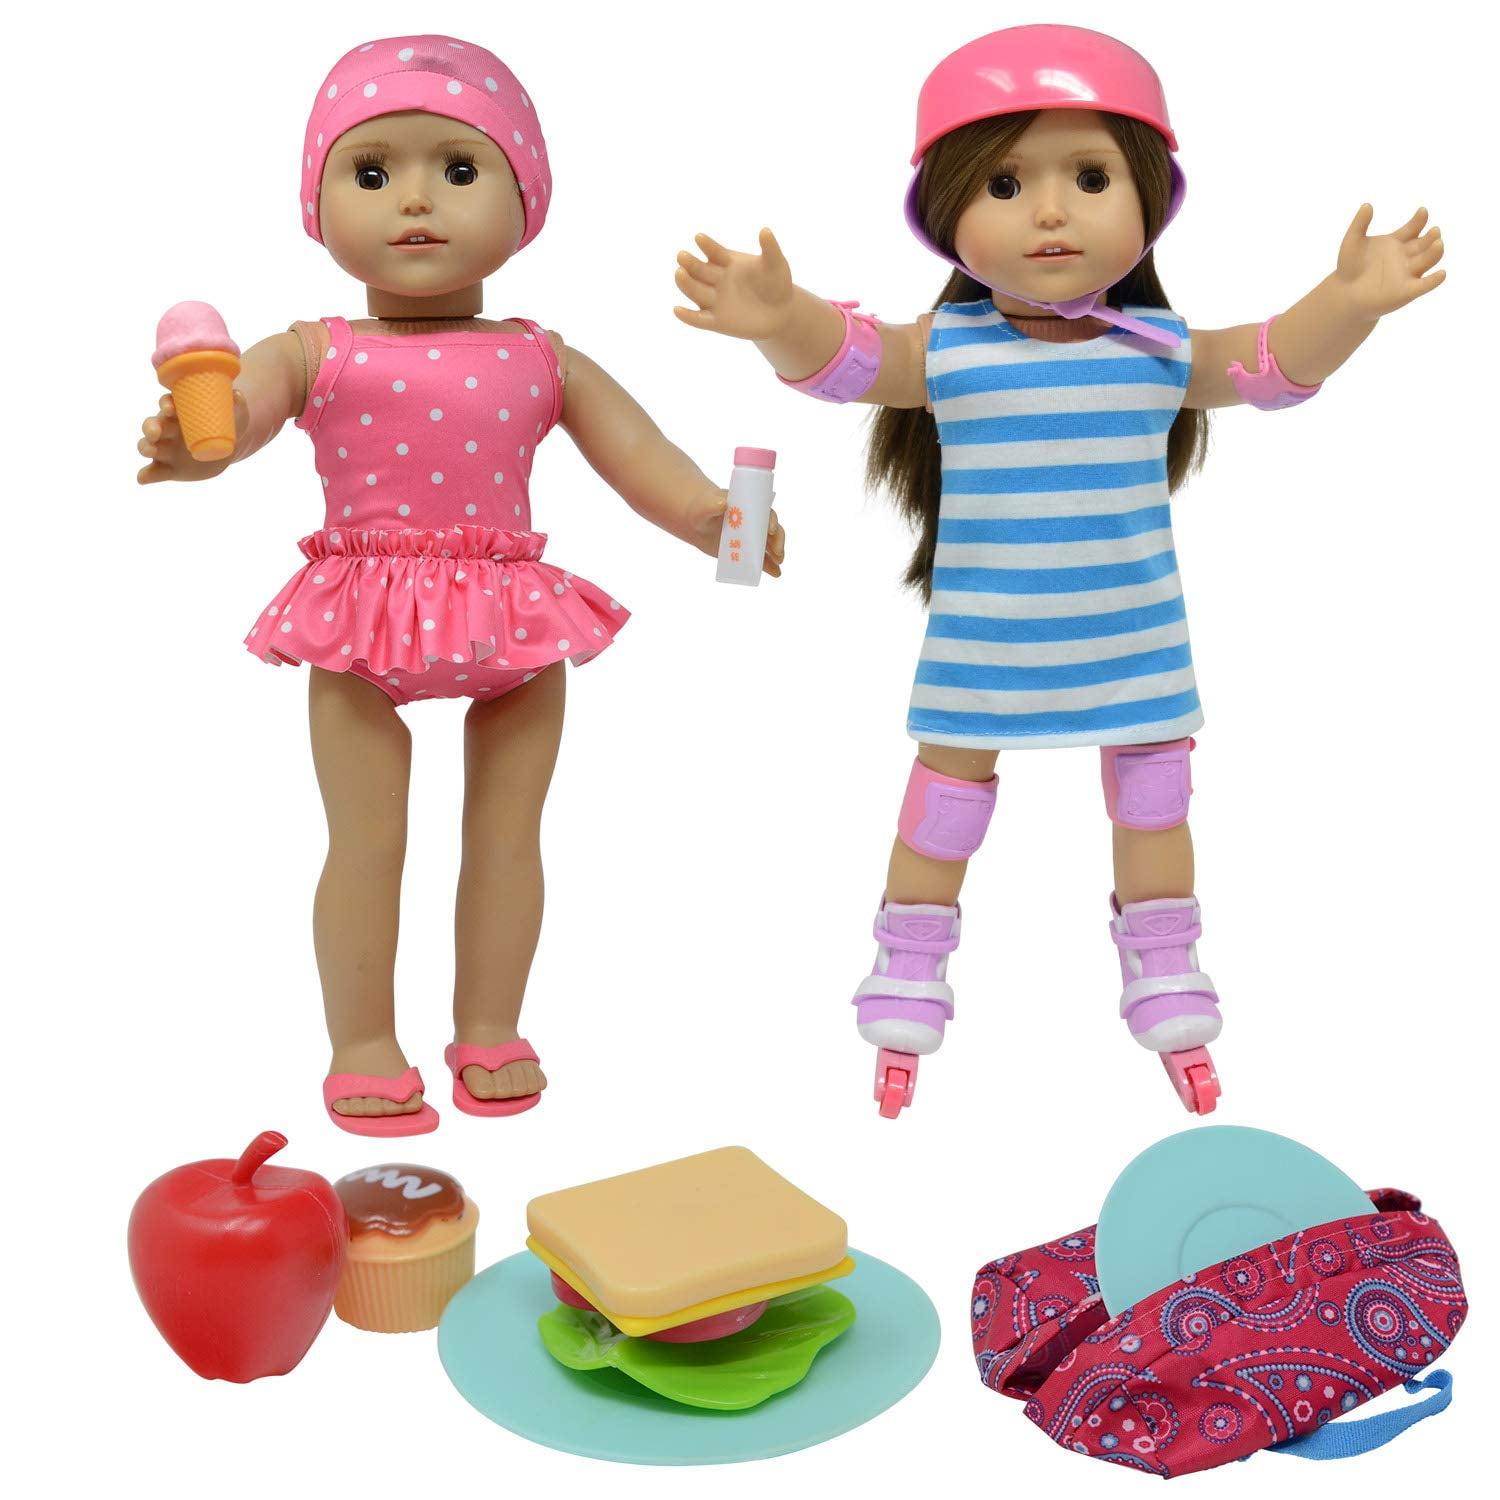 Perfect for 18" American Girl Doll Click N' Play Doll Vet Set Accessories 12PC 